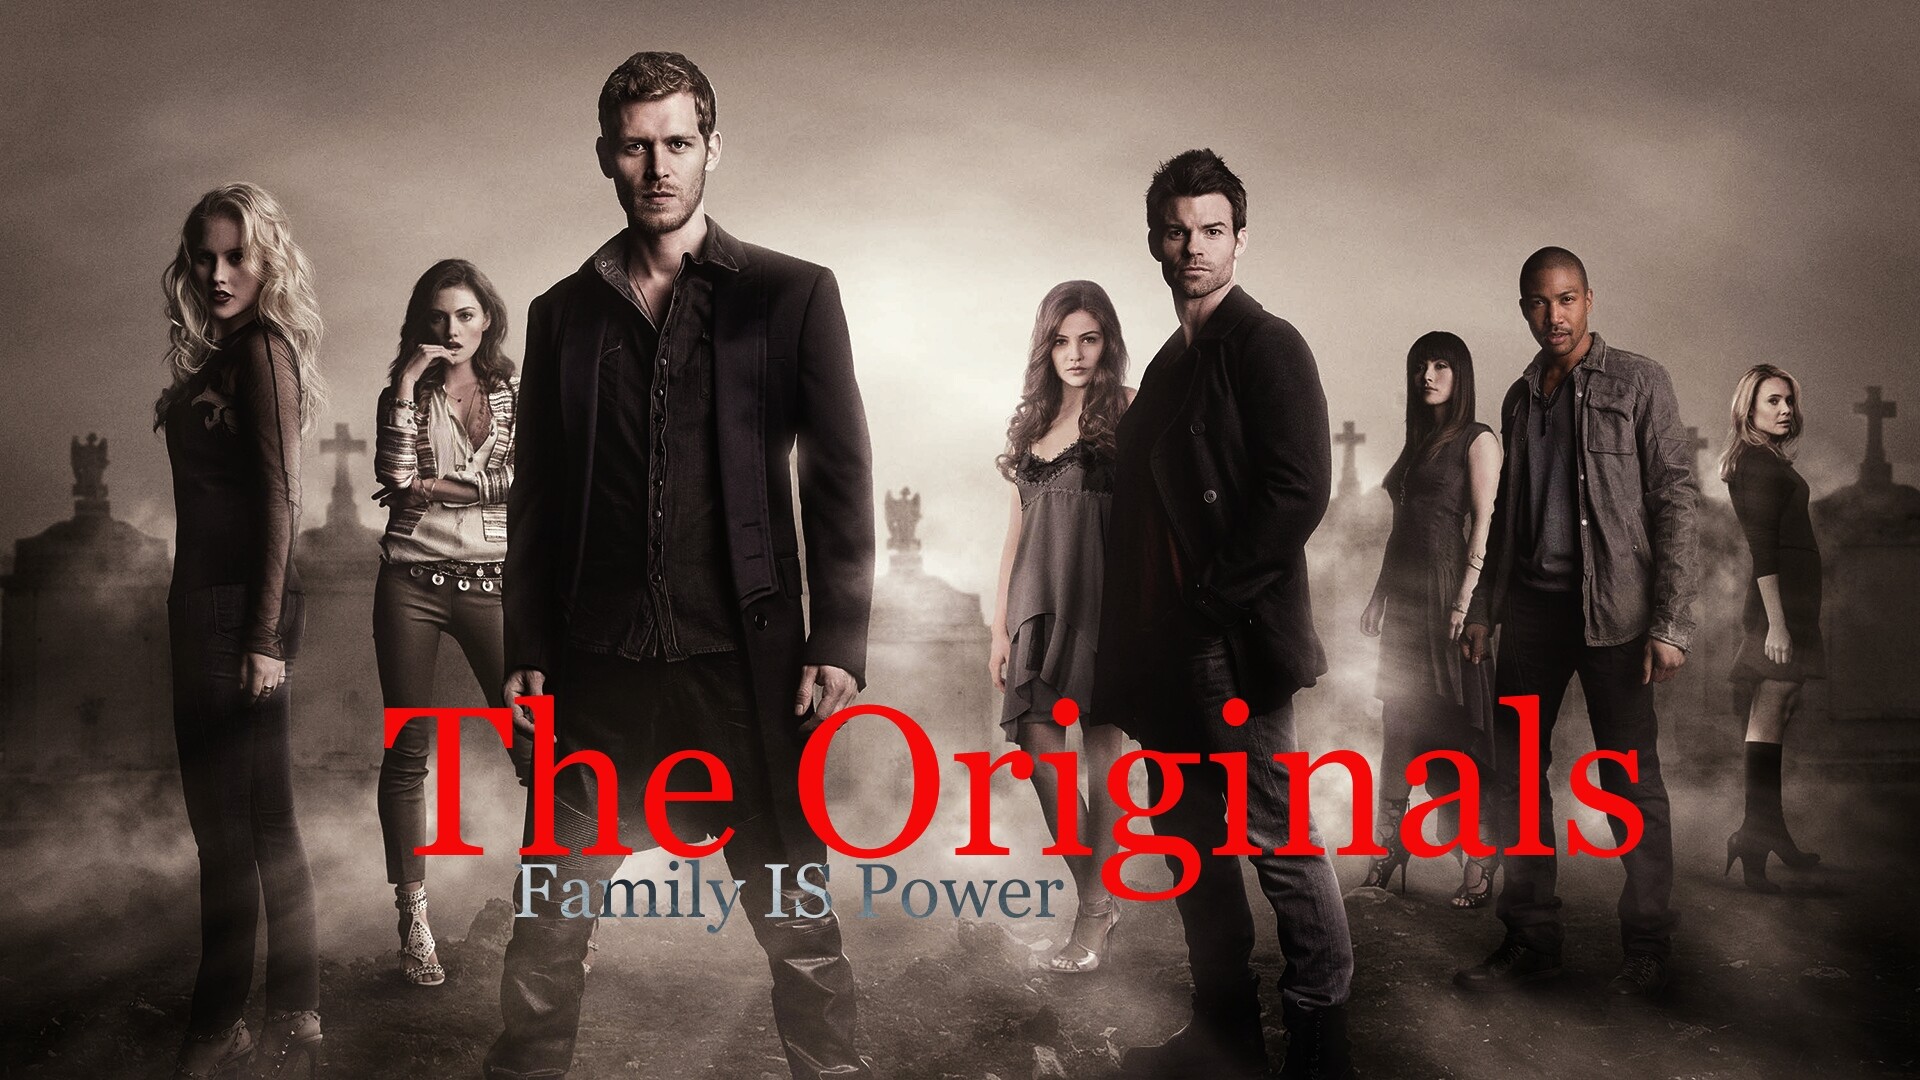 The Originals (TV Series): A spin-off of the supernatural drama The Vampire Diaries, Family is power. 1920x1080 Full HD Background.